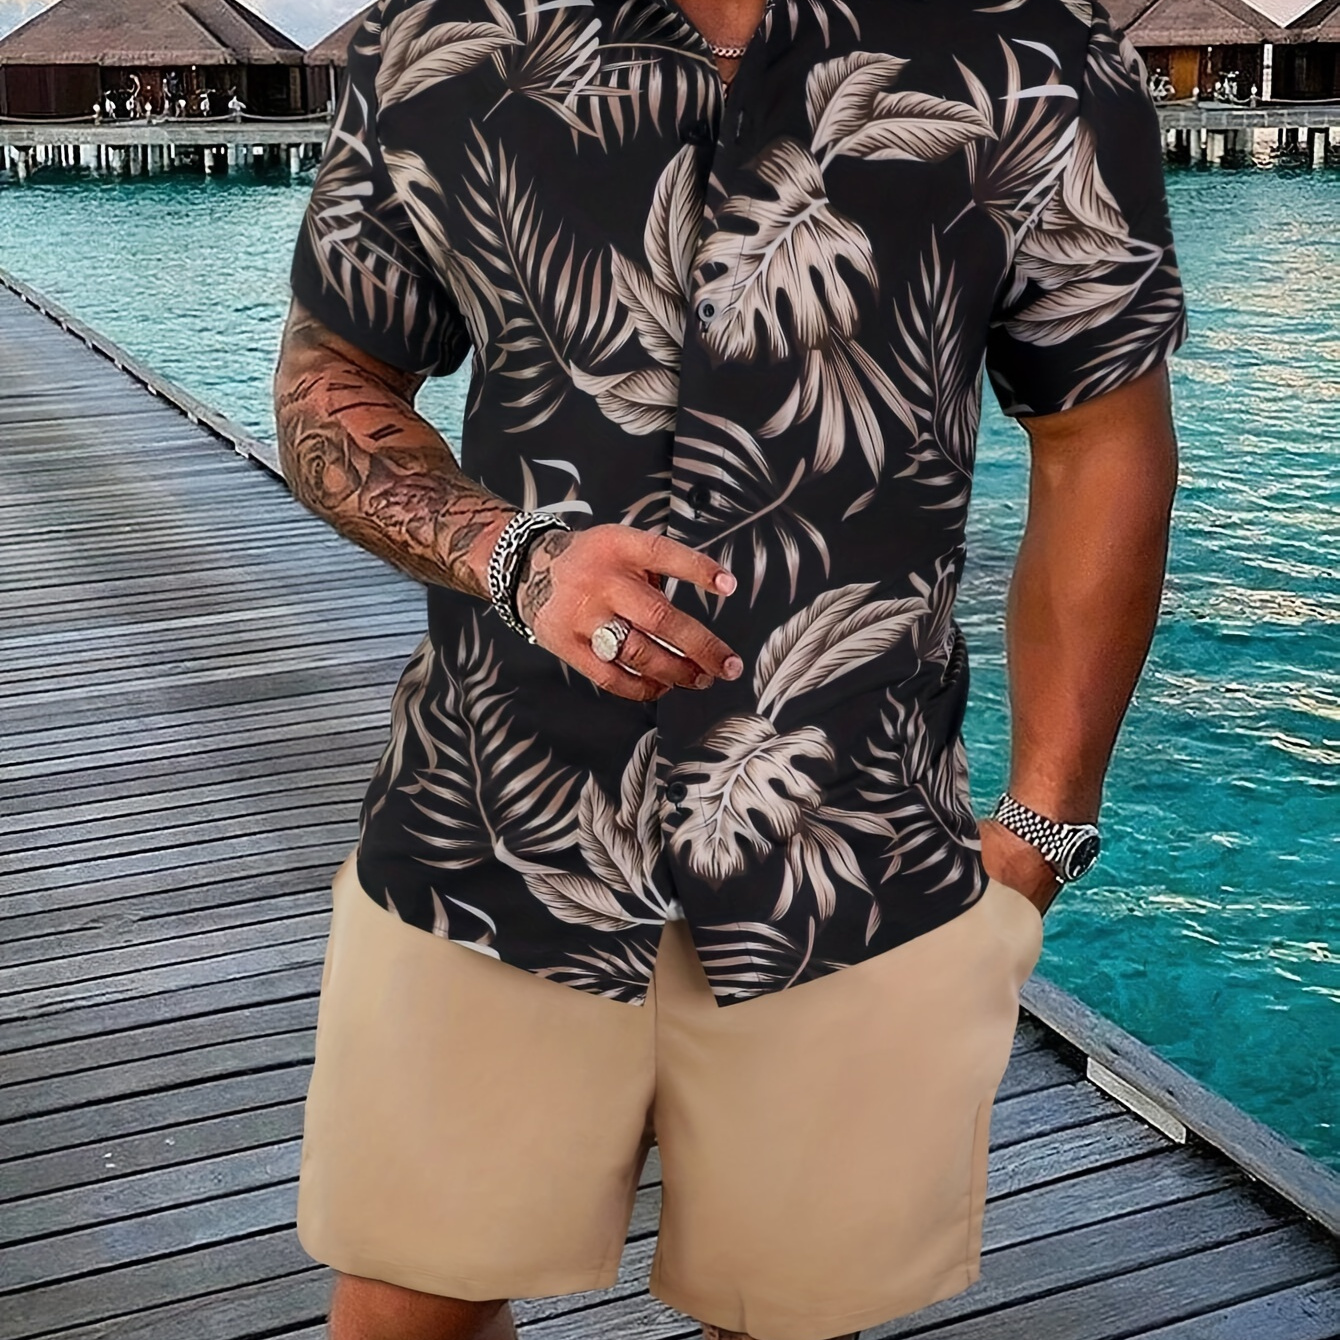 

Men's Tropical Floral Graphic Pattern Print Lapel Shirt With Short Sleeve And Button Down Placket, Casual And Chic Tops For Summer Leisurewear And Vacation